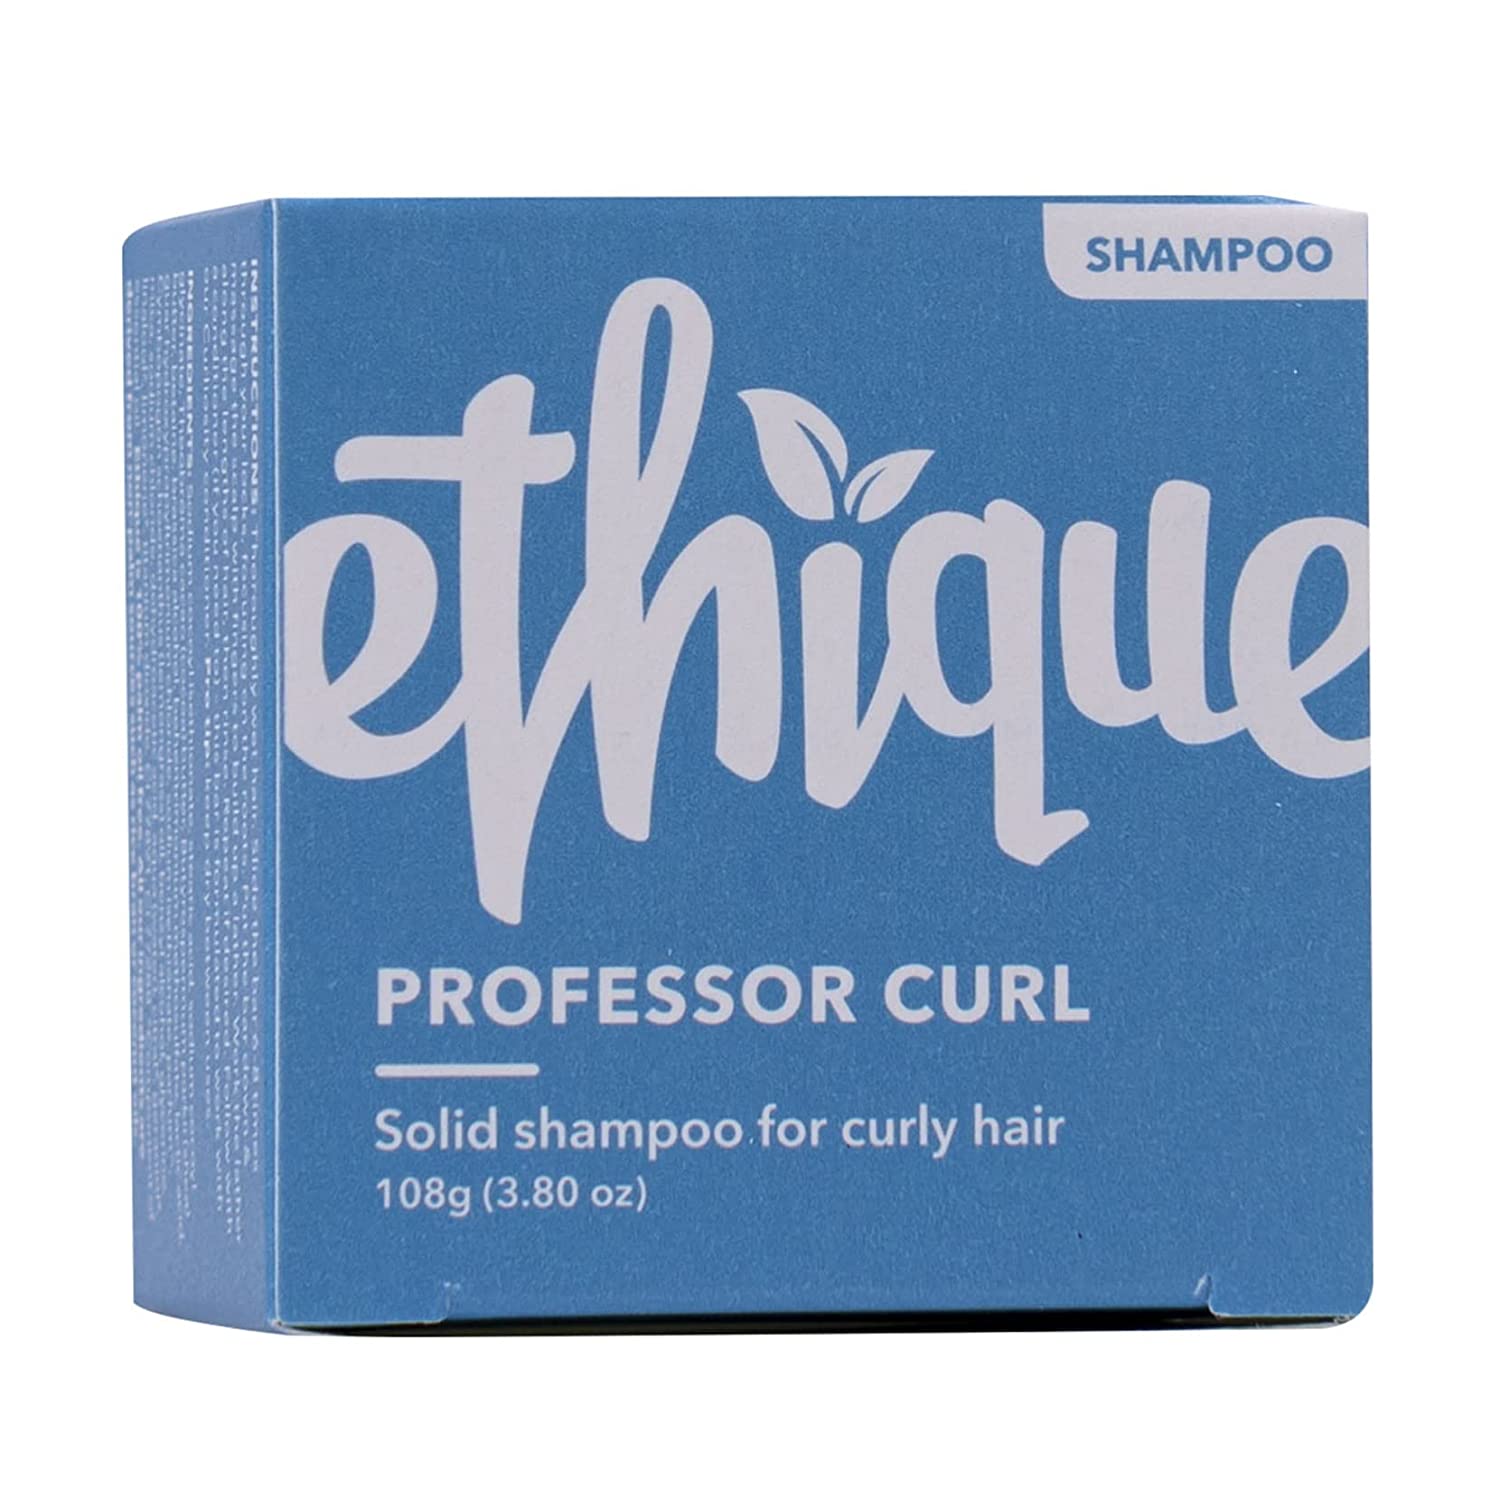 Ethique Solid Shampoo Bar for Curly Hair